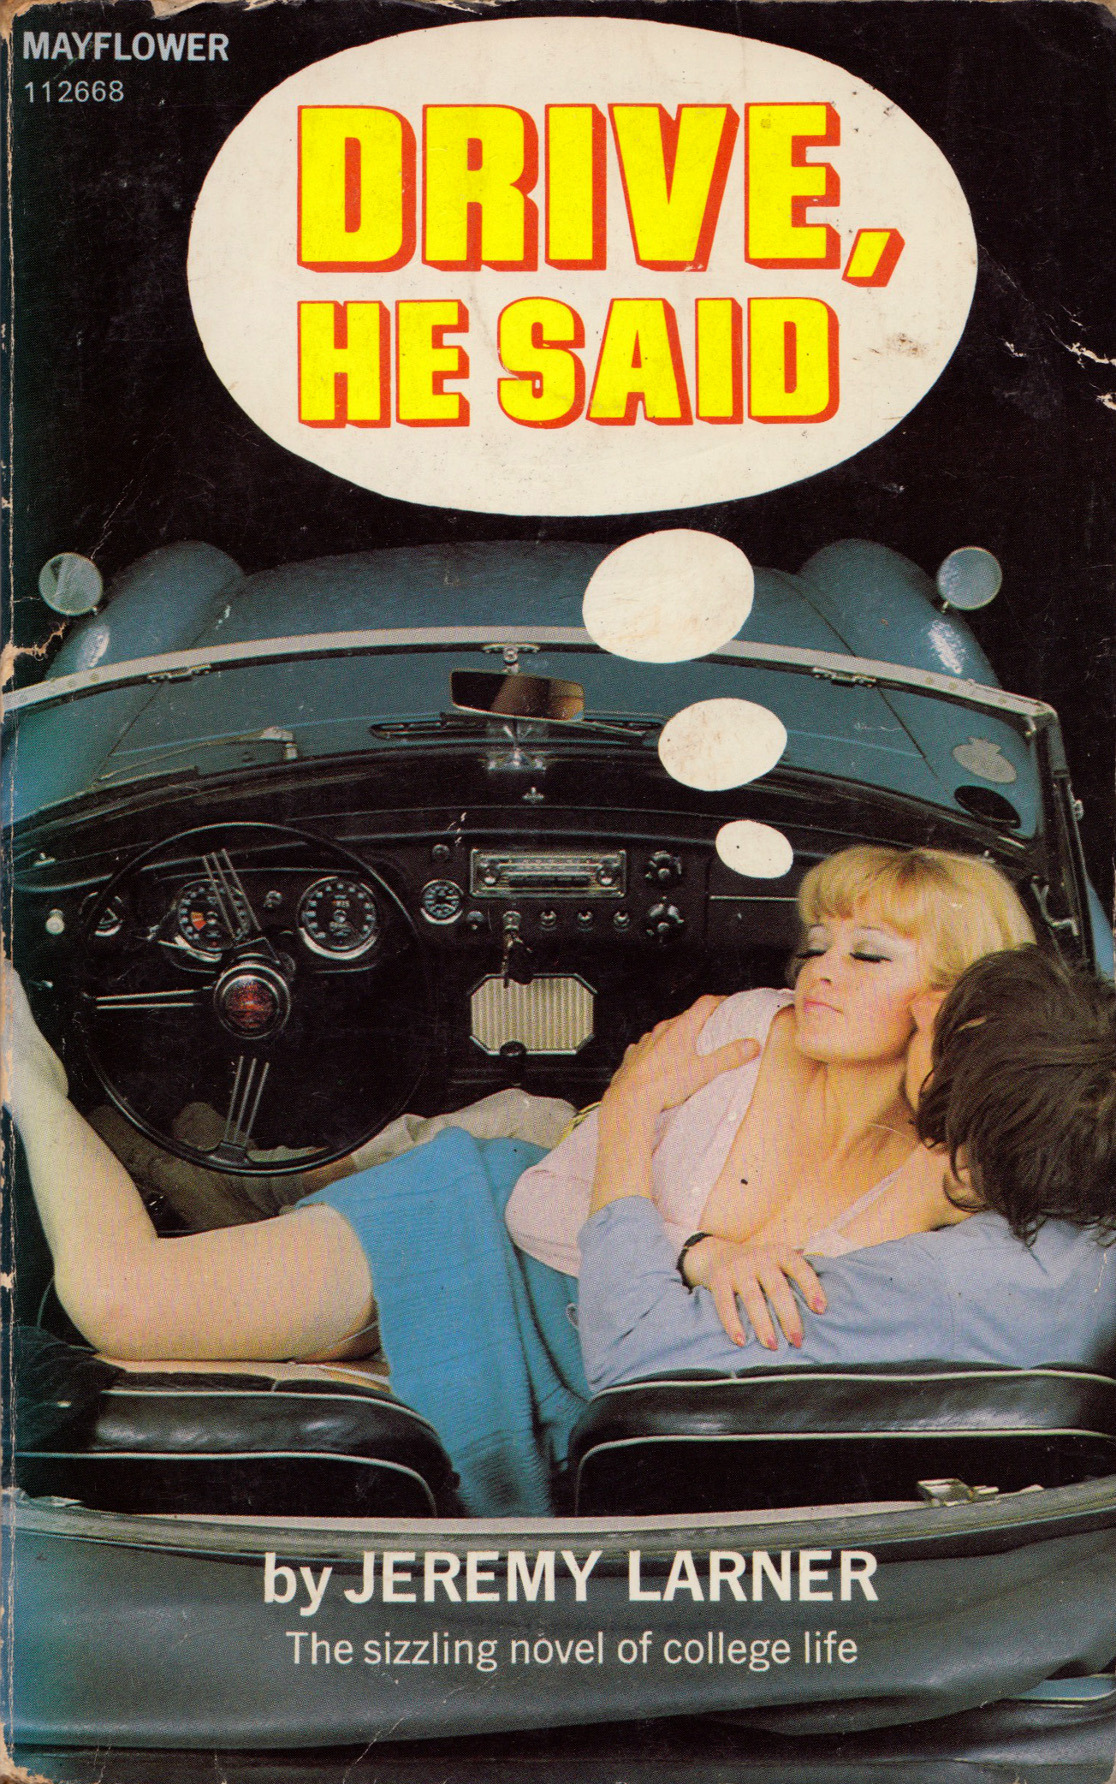 Drive, He Said, by Jeremy Larner (Mayflower, 1968). From a second-hand bookshop